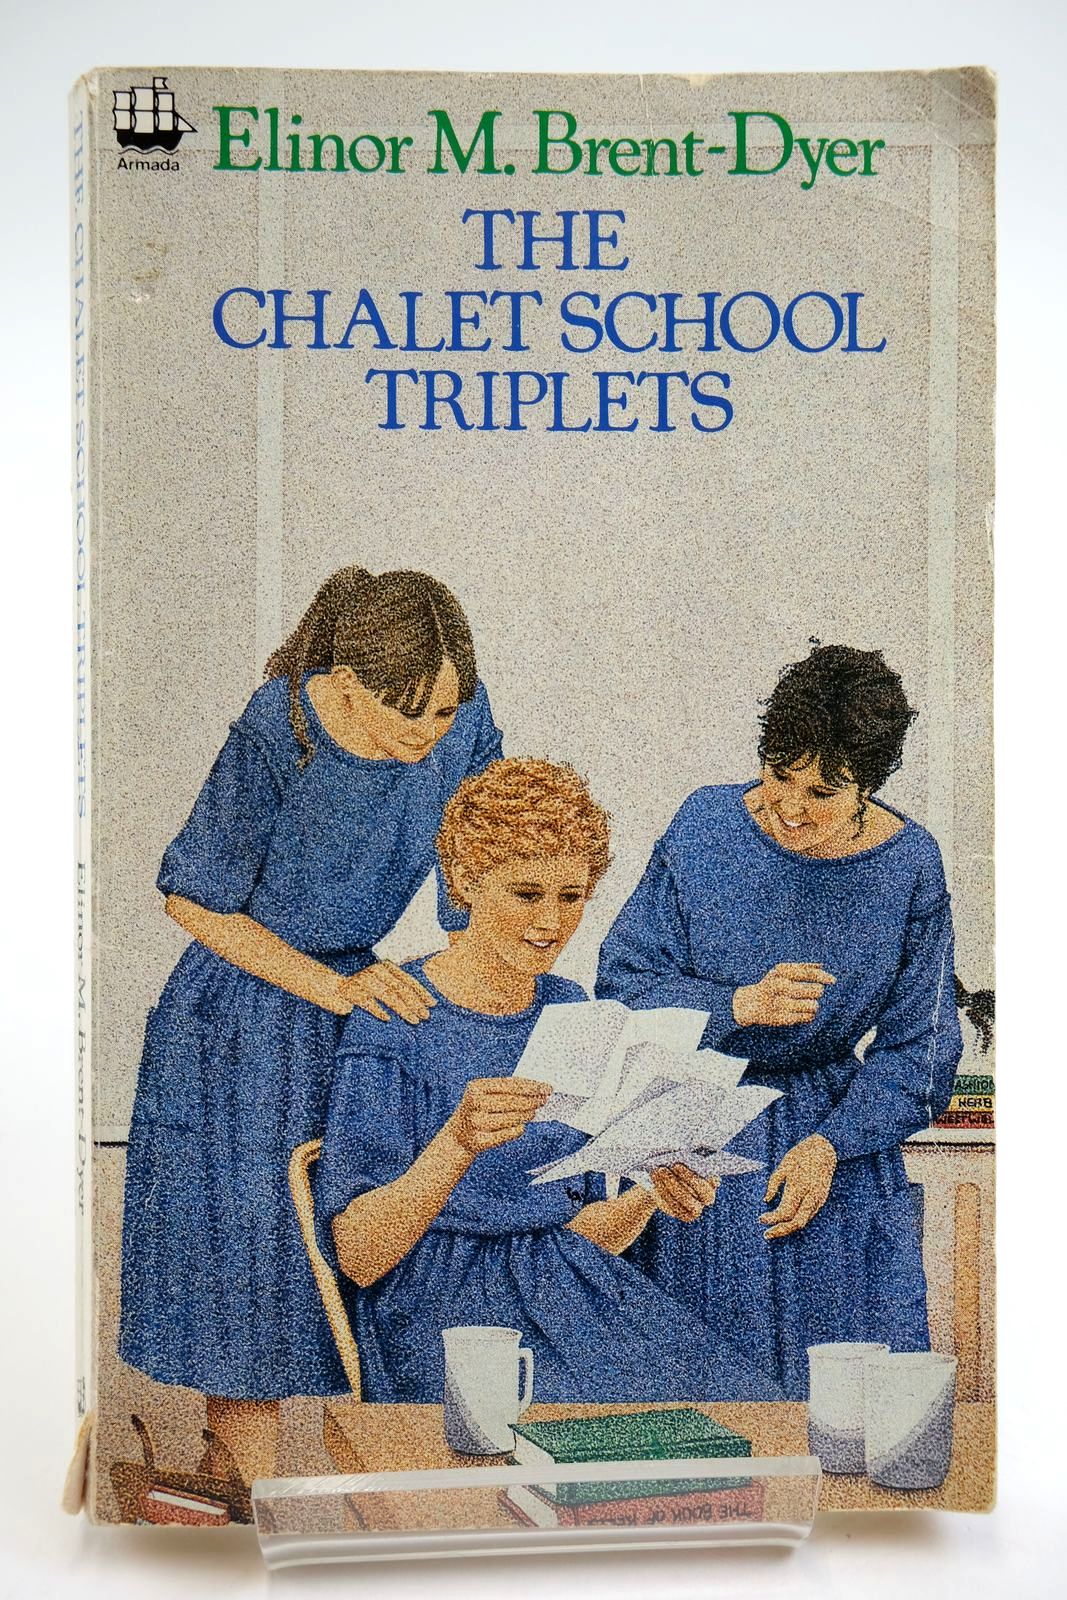 Photo of THE CHALET SCHOOL TRIPLETS written by Brent-Dyer, Elinor M. published by Armada (STOCK CODE: 2133496)  for sale by Stella & Rose's Books